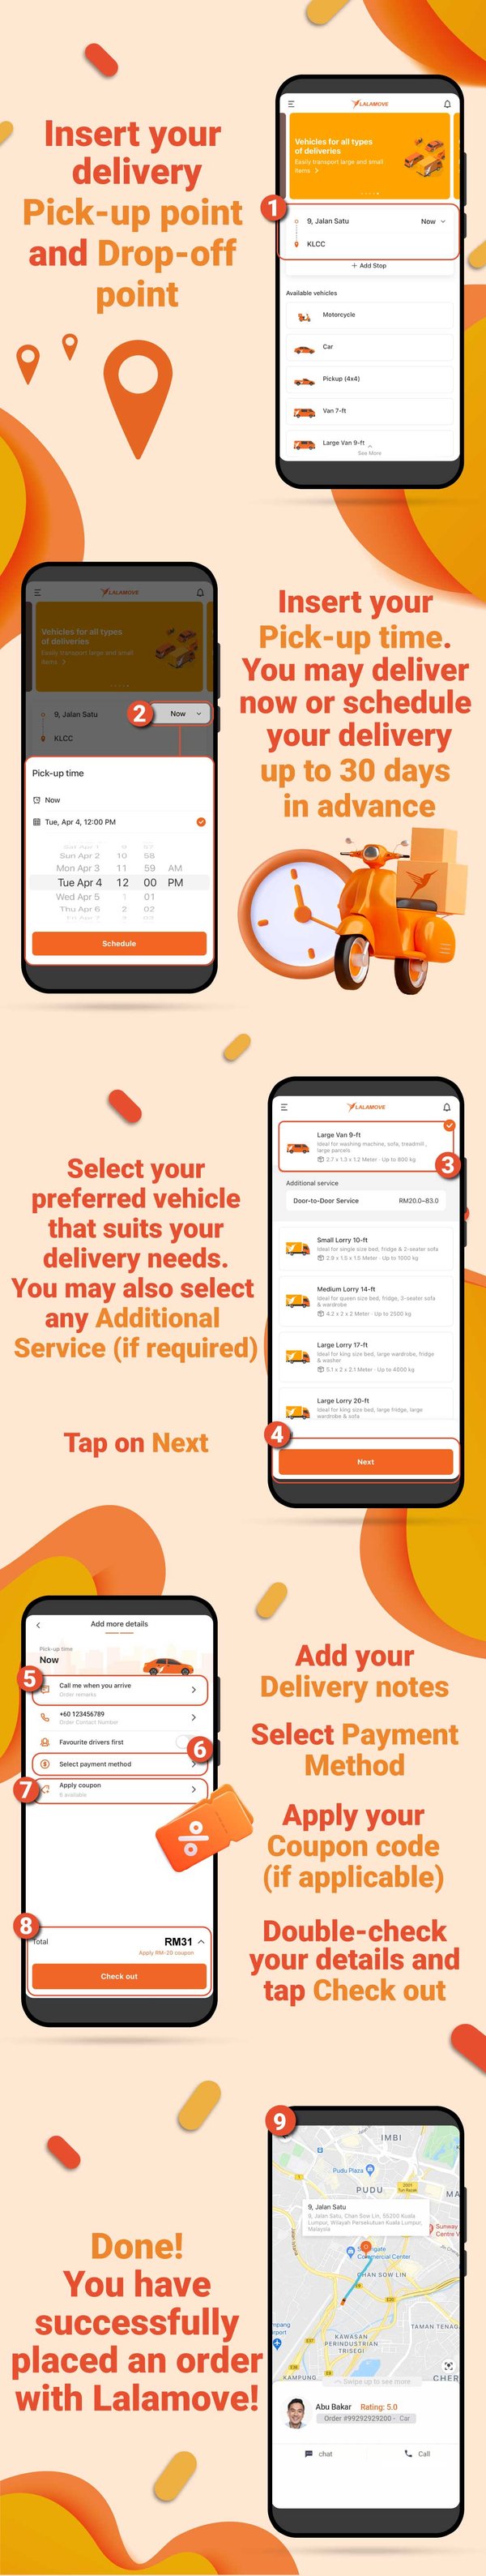 A step-by-step guide on how to use the Lalamove app, featuring a series of screenshots on a smartphone, showing the different features and options available for users to book and track their delivery orders. The guide incl-1